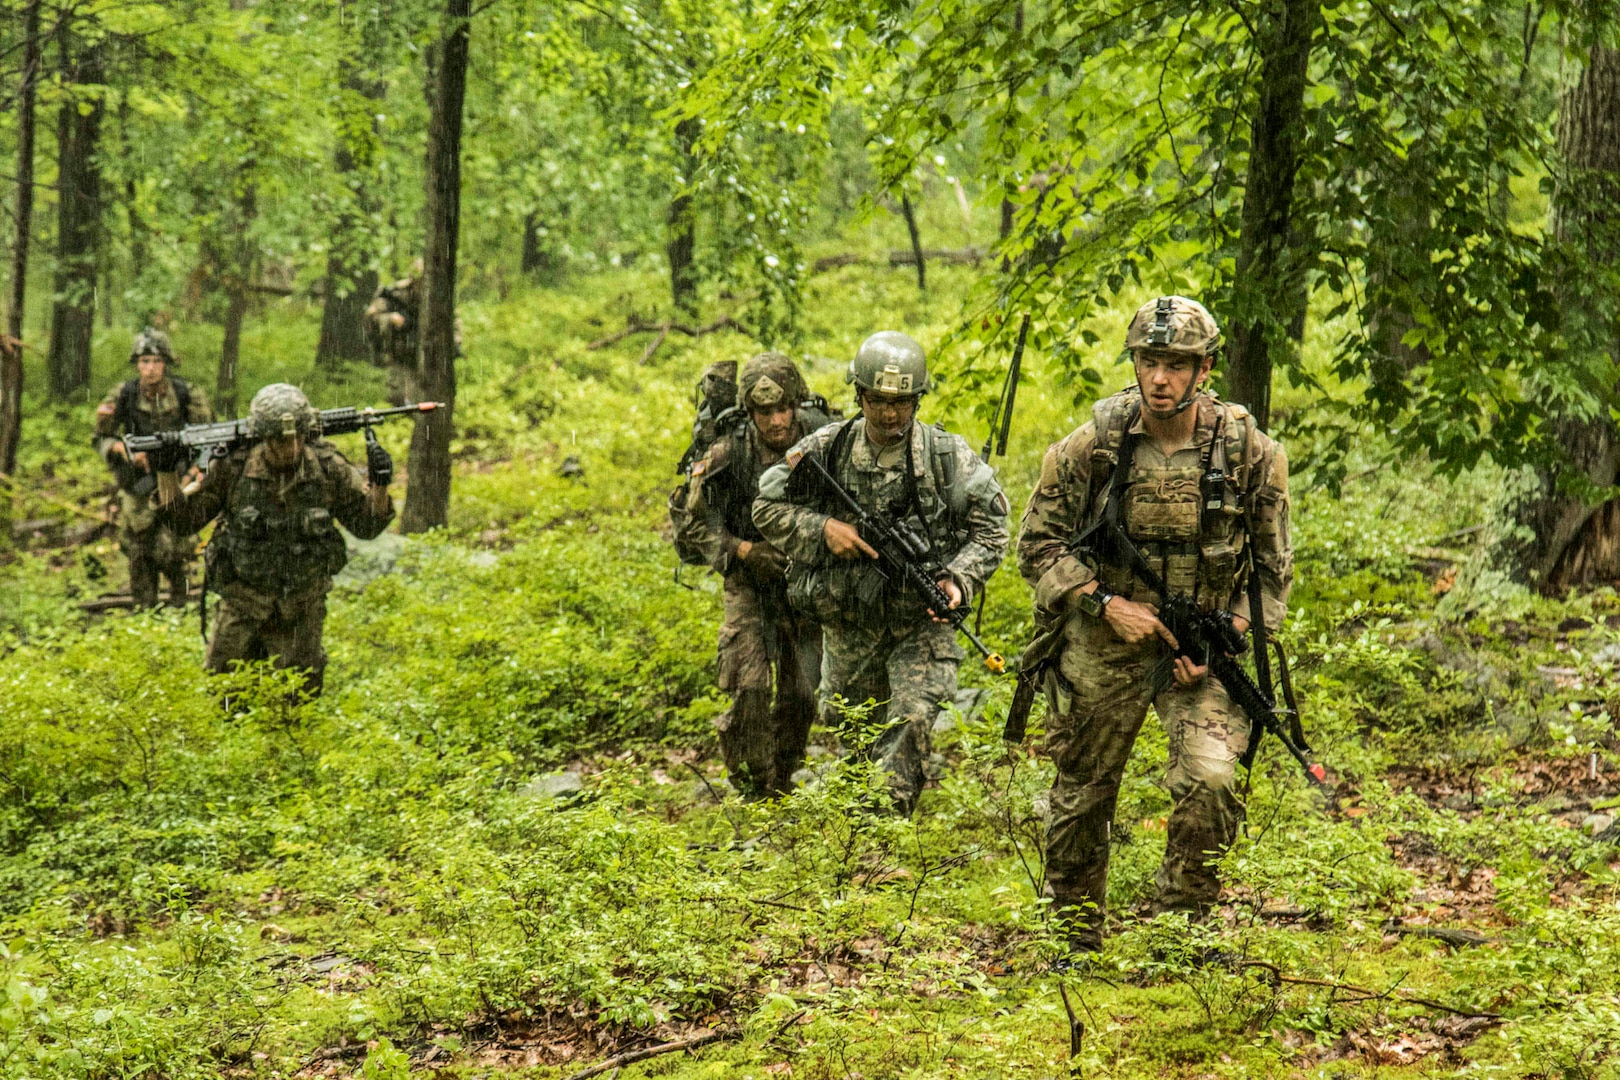 Army National Guard Soldiers from the Northeast Region at infantry reclassification course 18-002  ruck march in the mountains during their final field training exercise at Camp Smith Training Site, Cortlandt Manor, N.Y., Aug. 13, 2018. The 106th Regional Training Institute conducted the infantry course from August 3-21, 2018 and adapted the training curriculum to meet the new infantry standards.